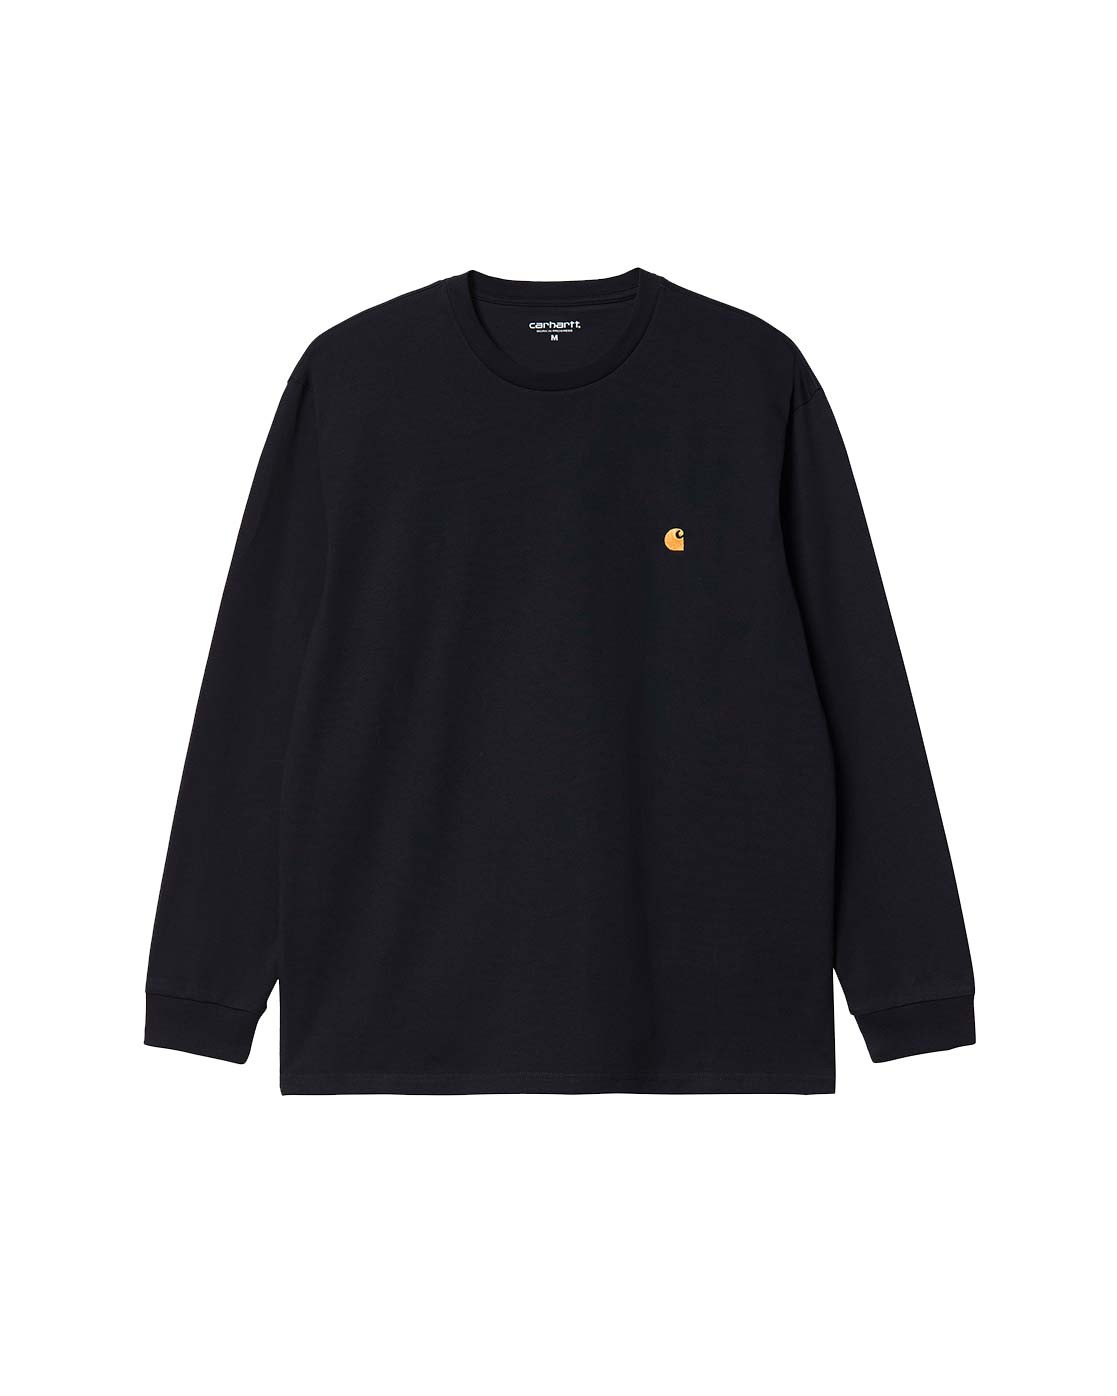 L/s Chase T-shirt